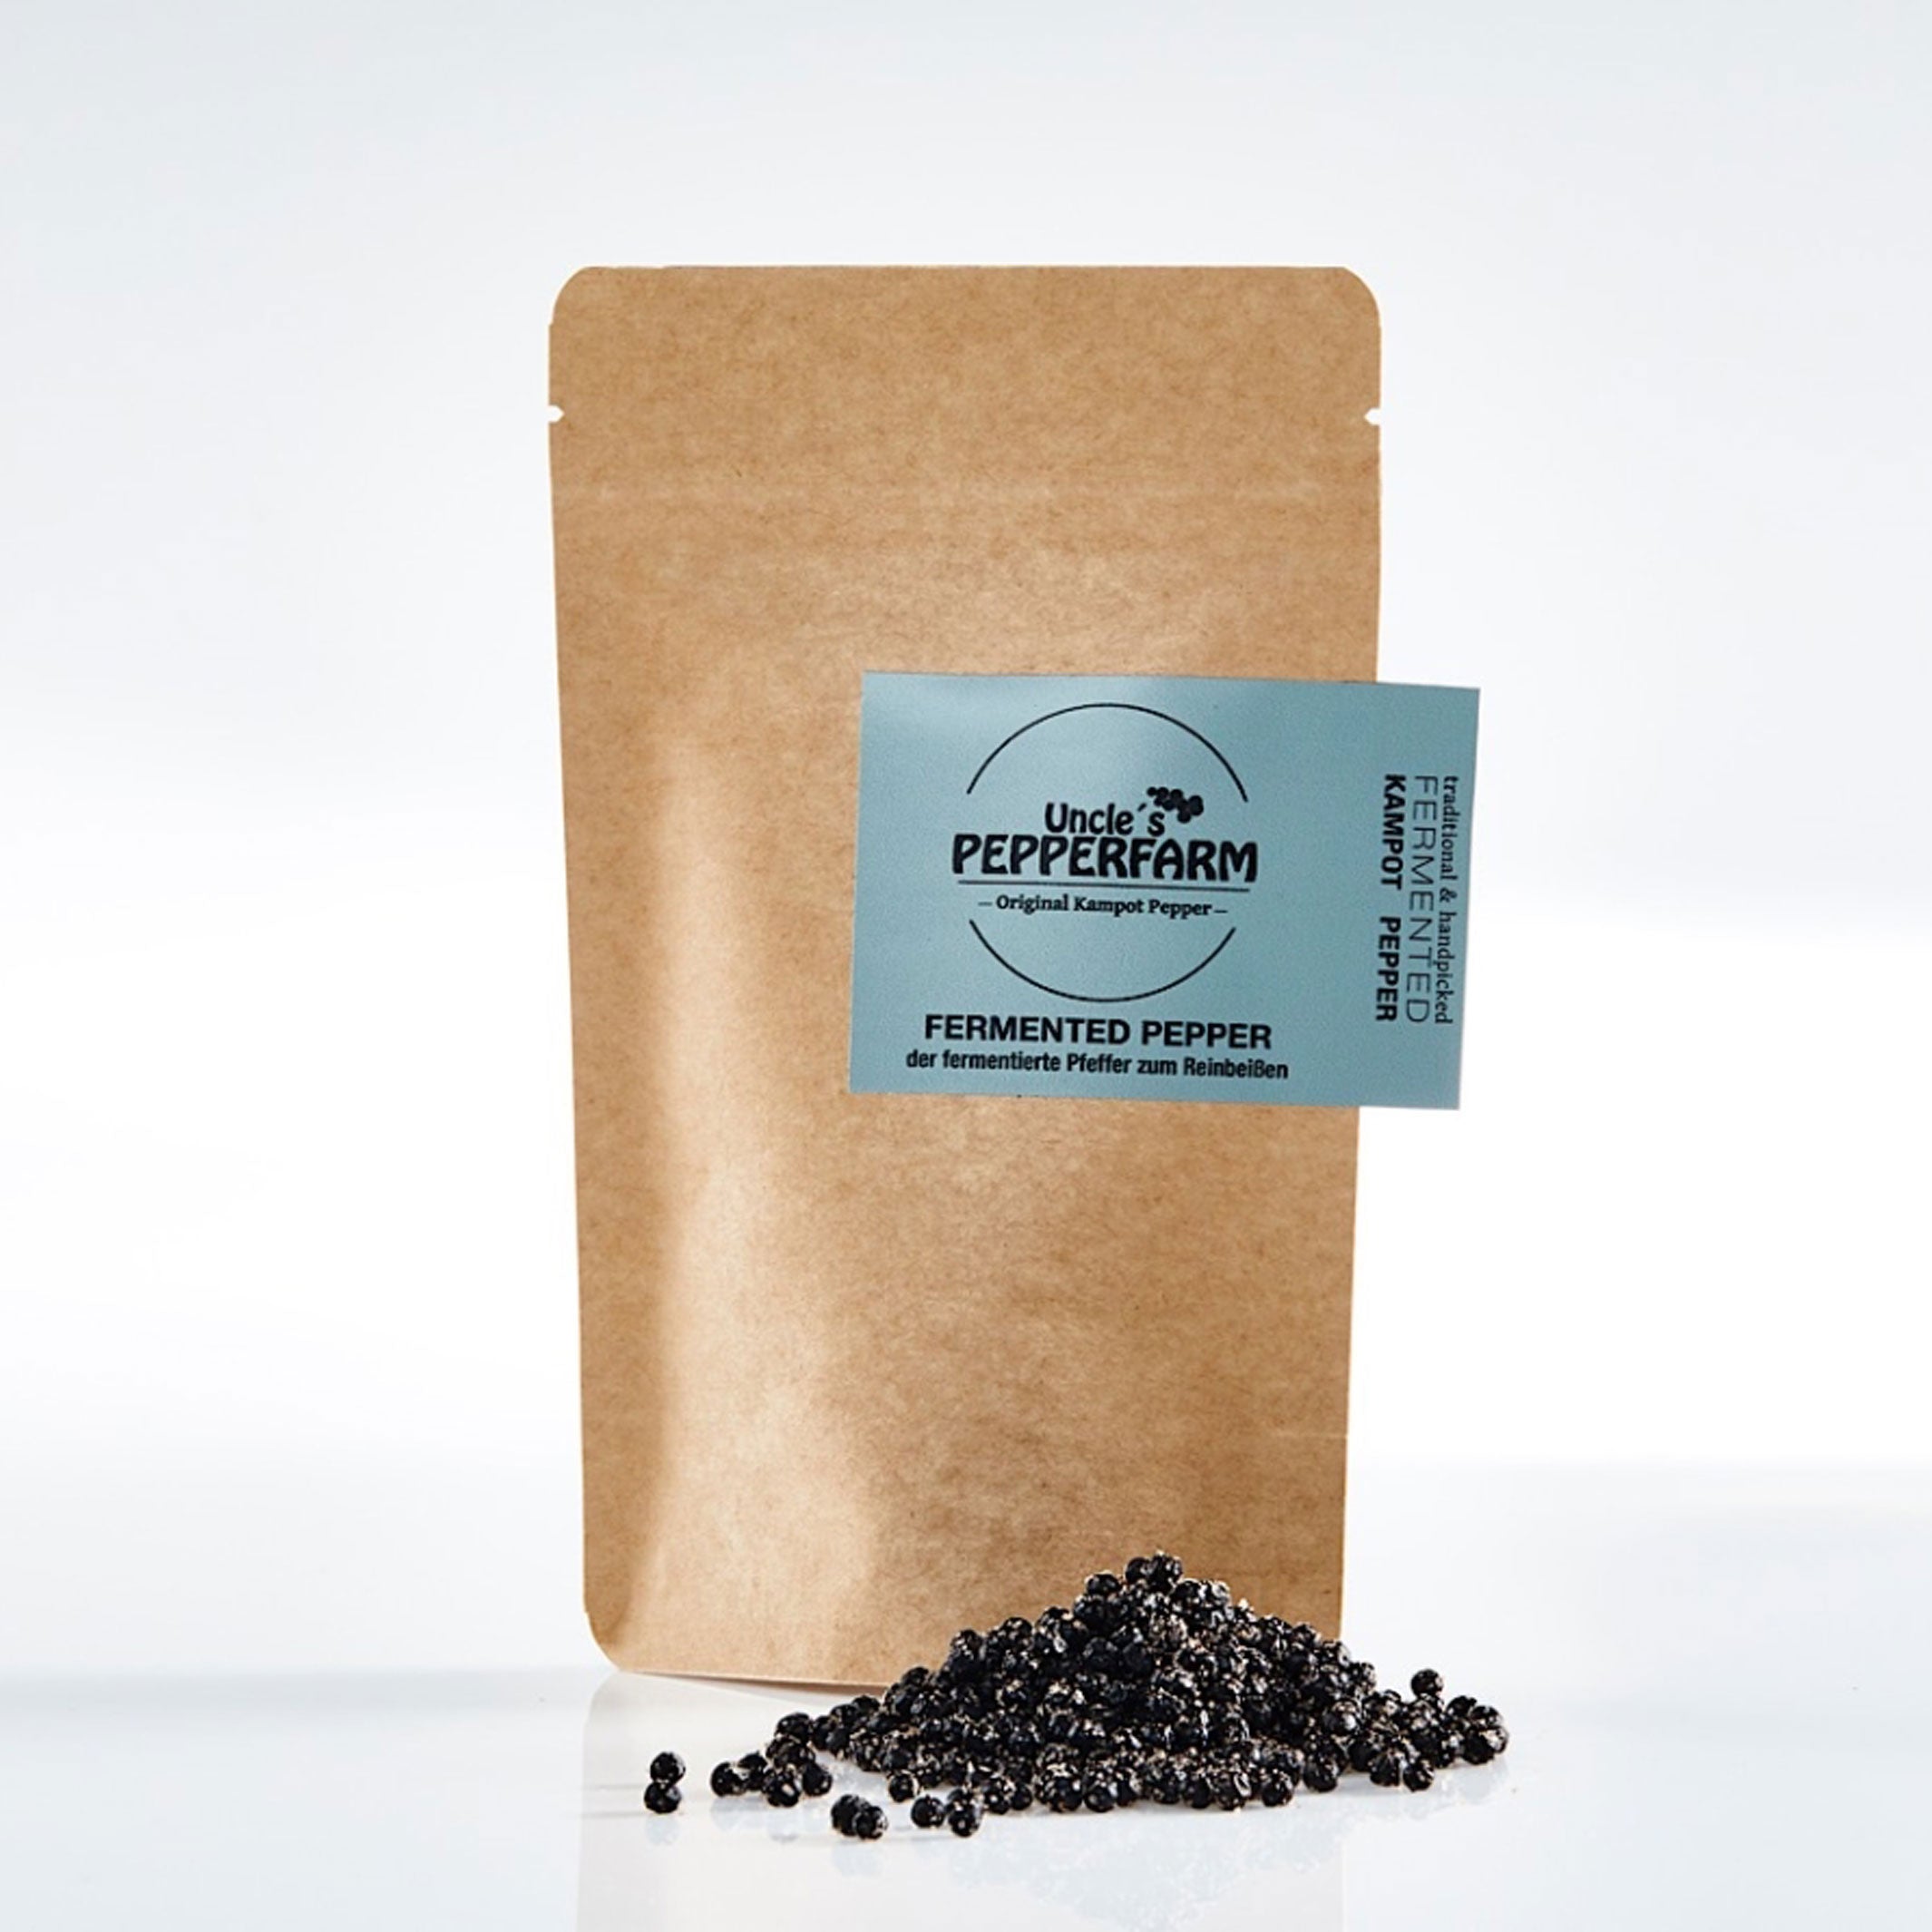 Fermented KAMPOT PEPPER | PEPPERCORNS - pickled in sea salt | 50g in aroma protection bag | Uncle's Pepperfarm